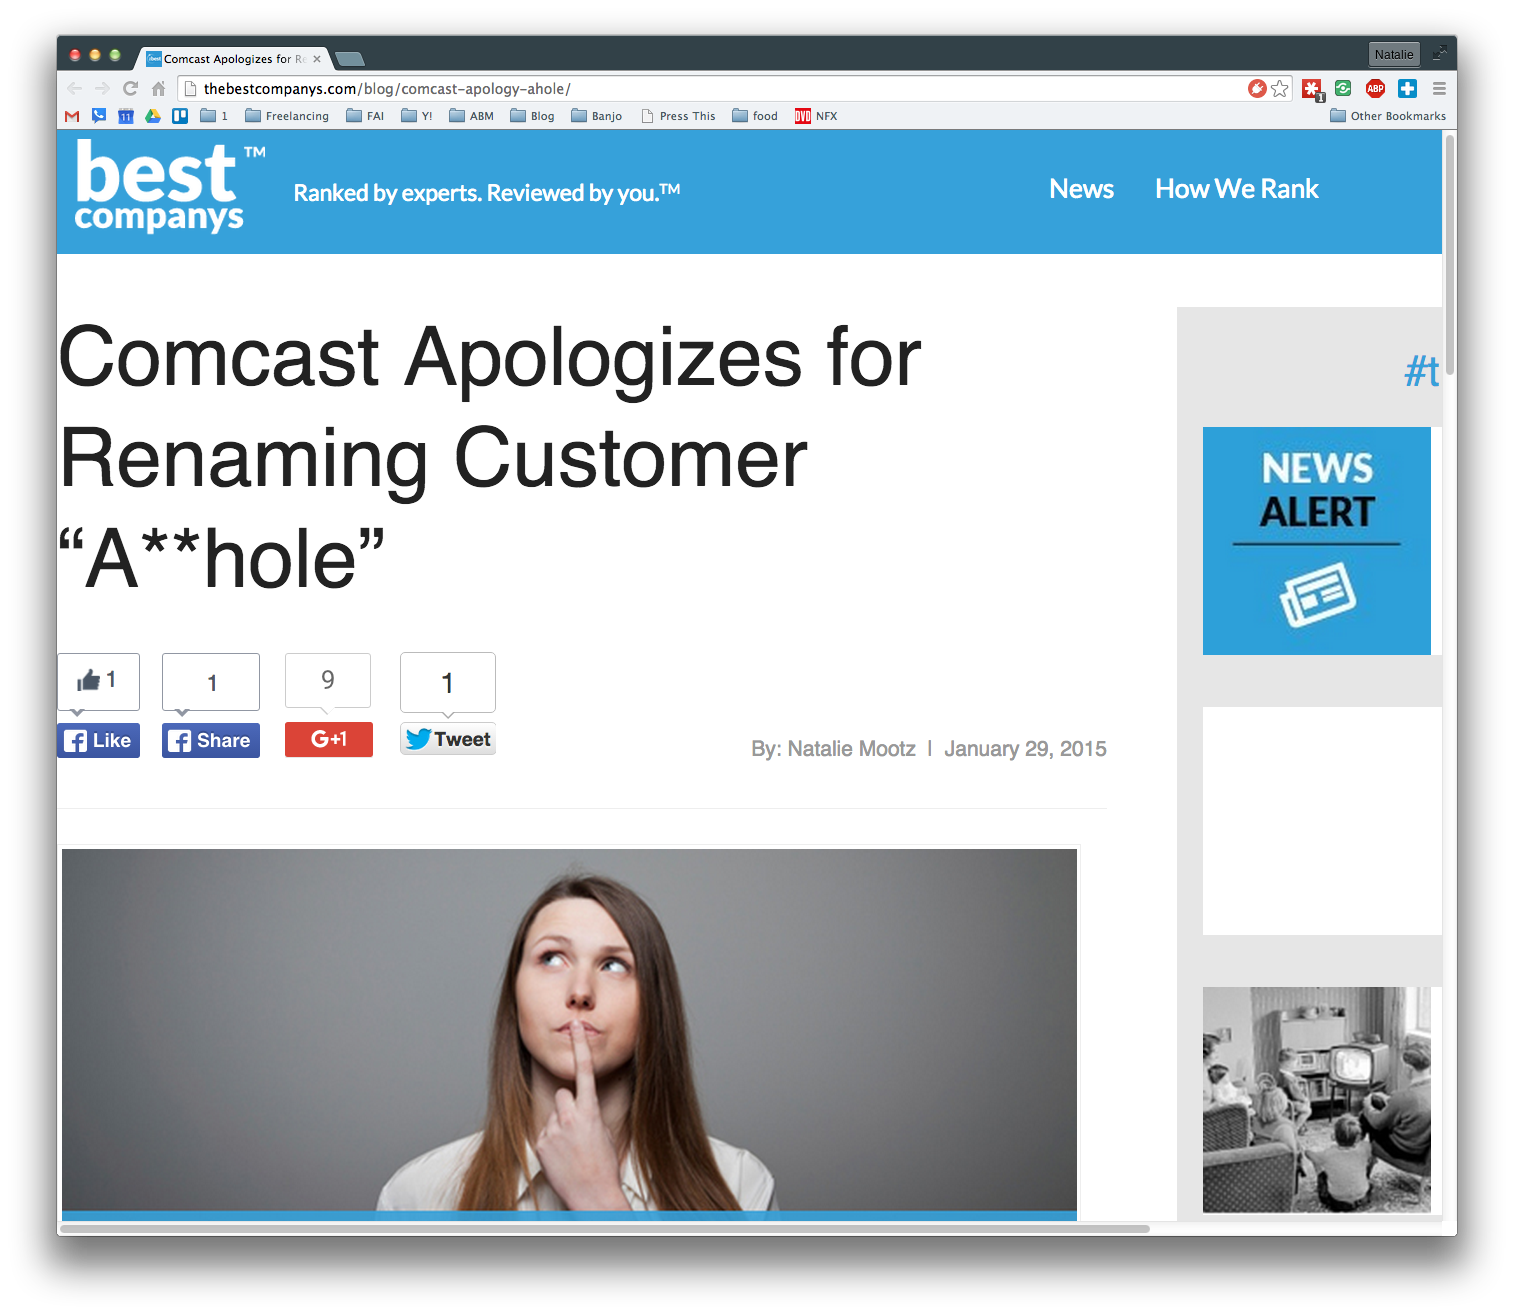 Comcast Apologizes for Renaming Customer “A**hole”